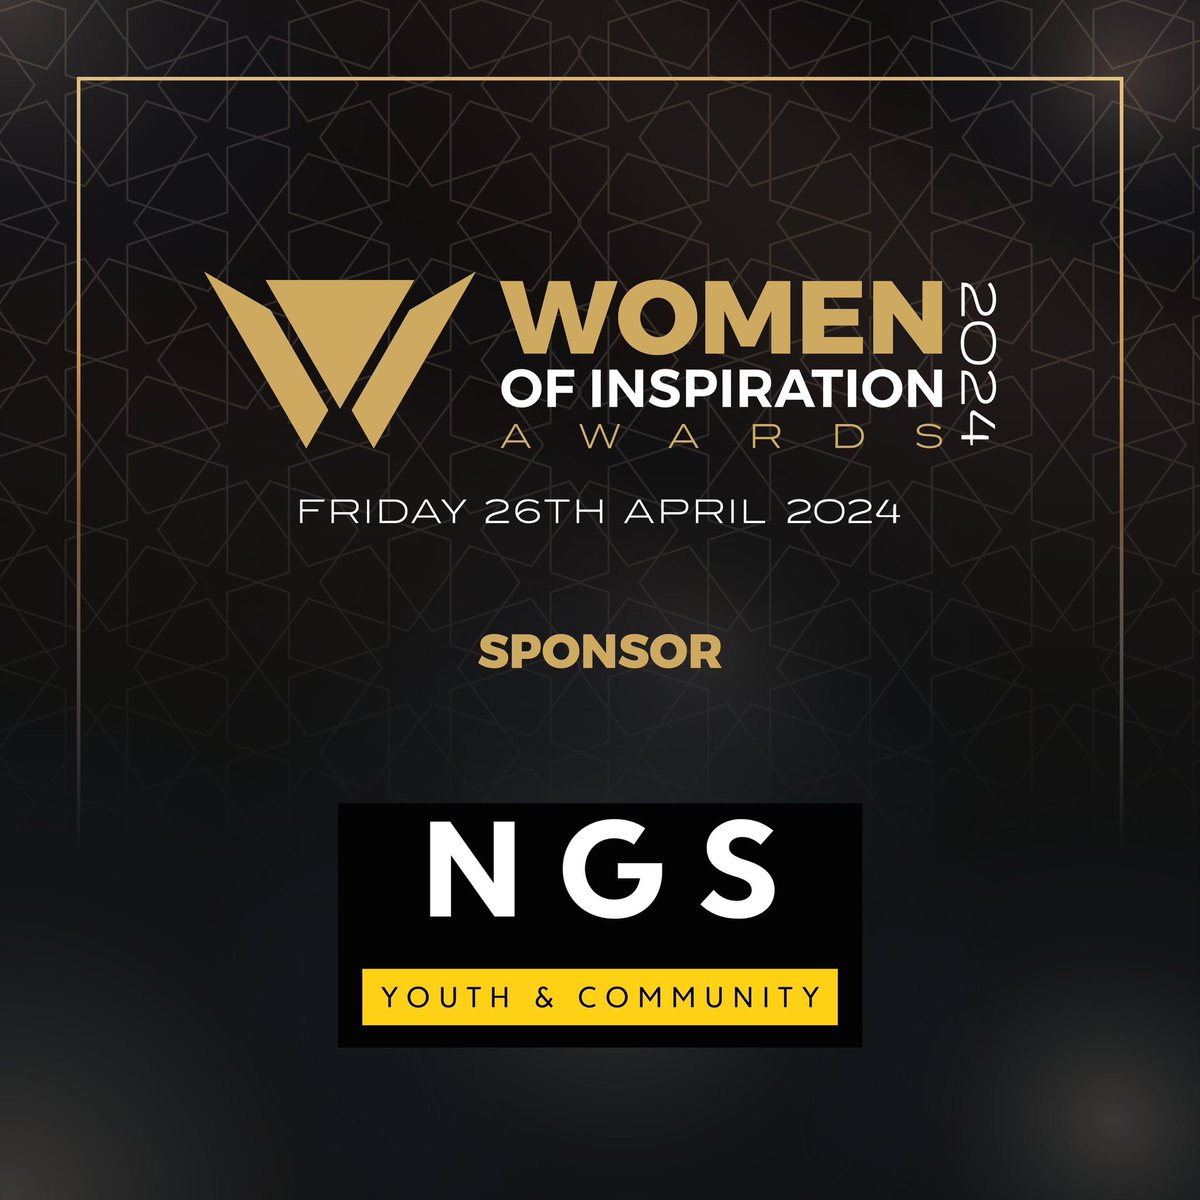 The Women of Inspiration Awards are delighted to announce our sponsor, @NGS We are grateful for their support in empowering and celebrating inspiring women. sponsor and be part of this incredible event, email us at awards@empoweringeducation.co.uk